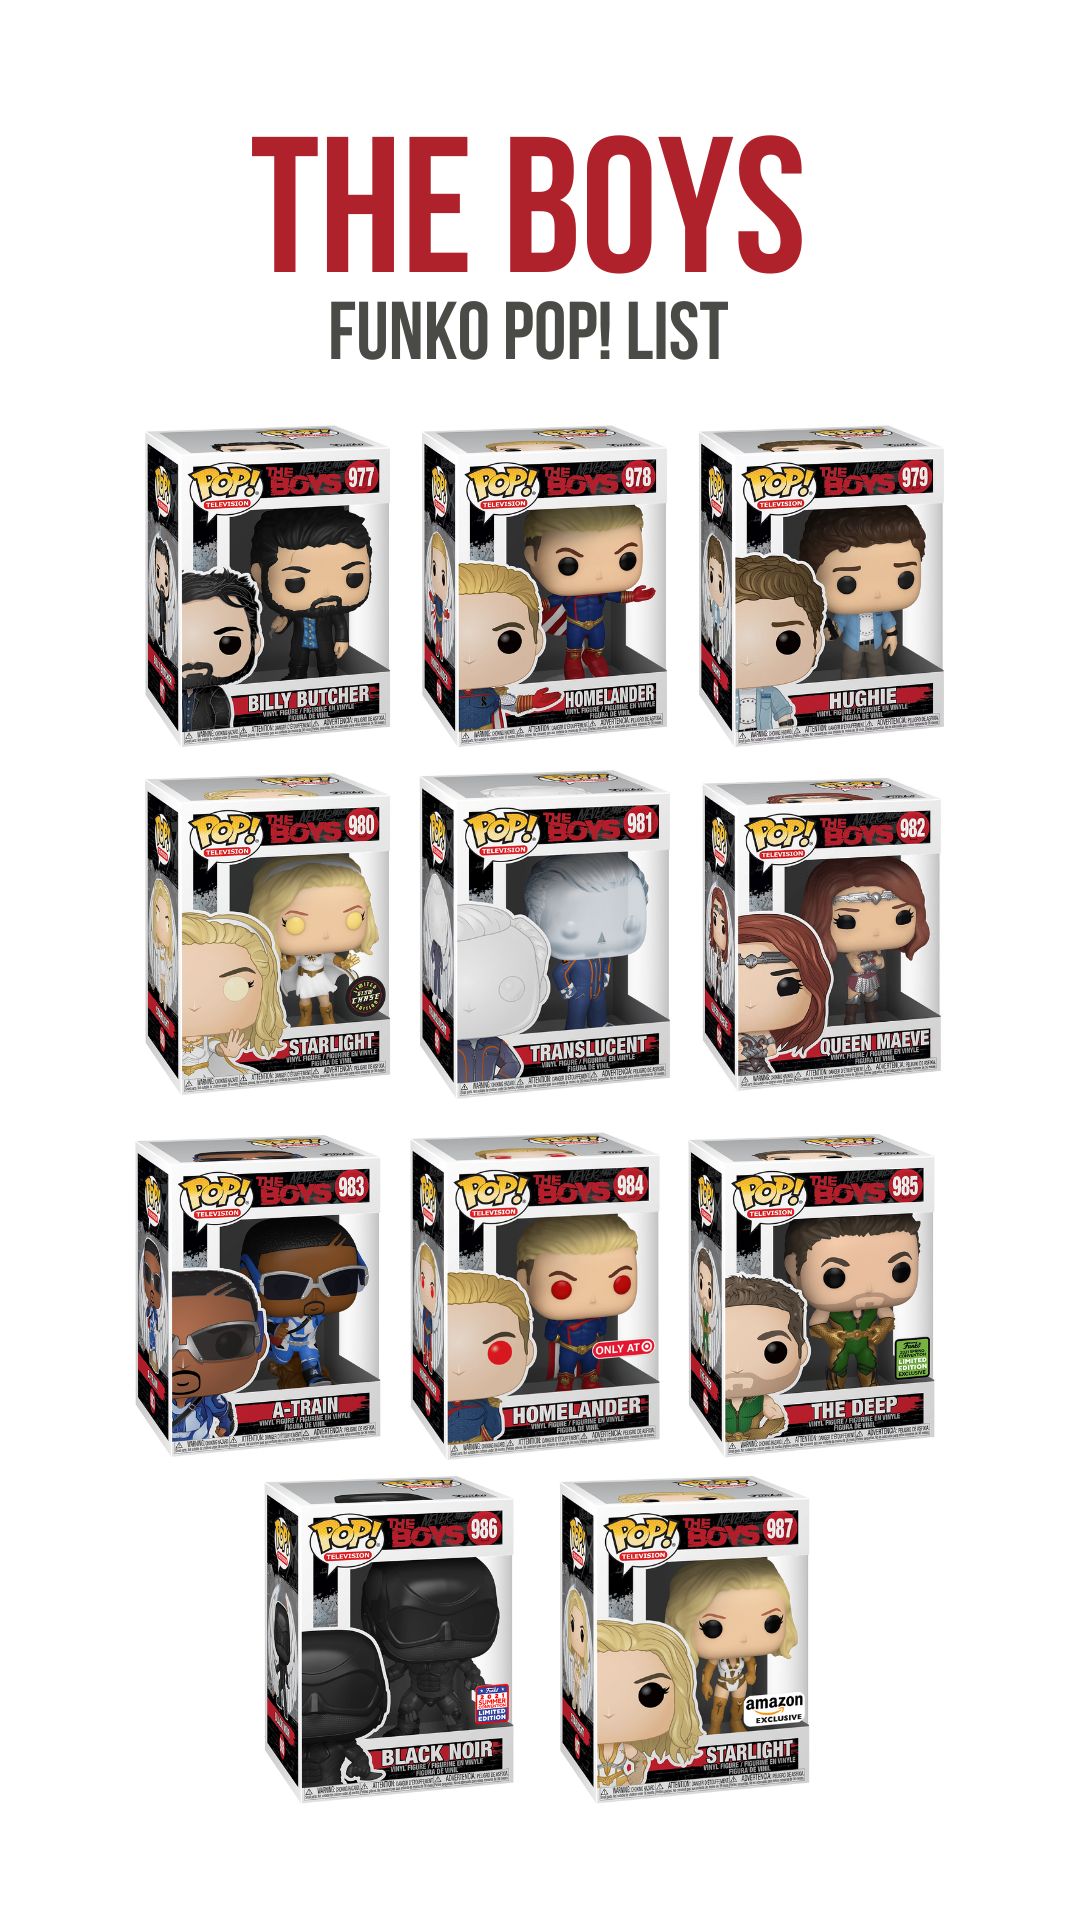 The Boys Funko Pop List of Figures with Boxes